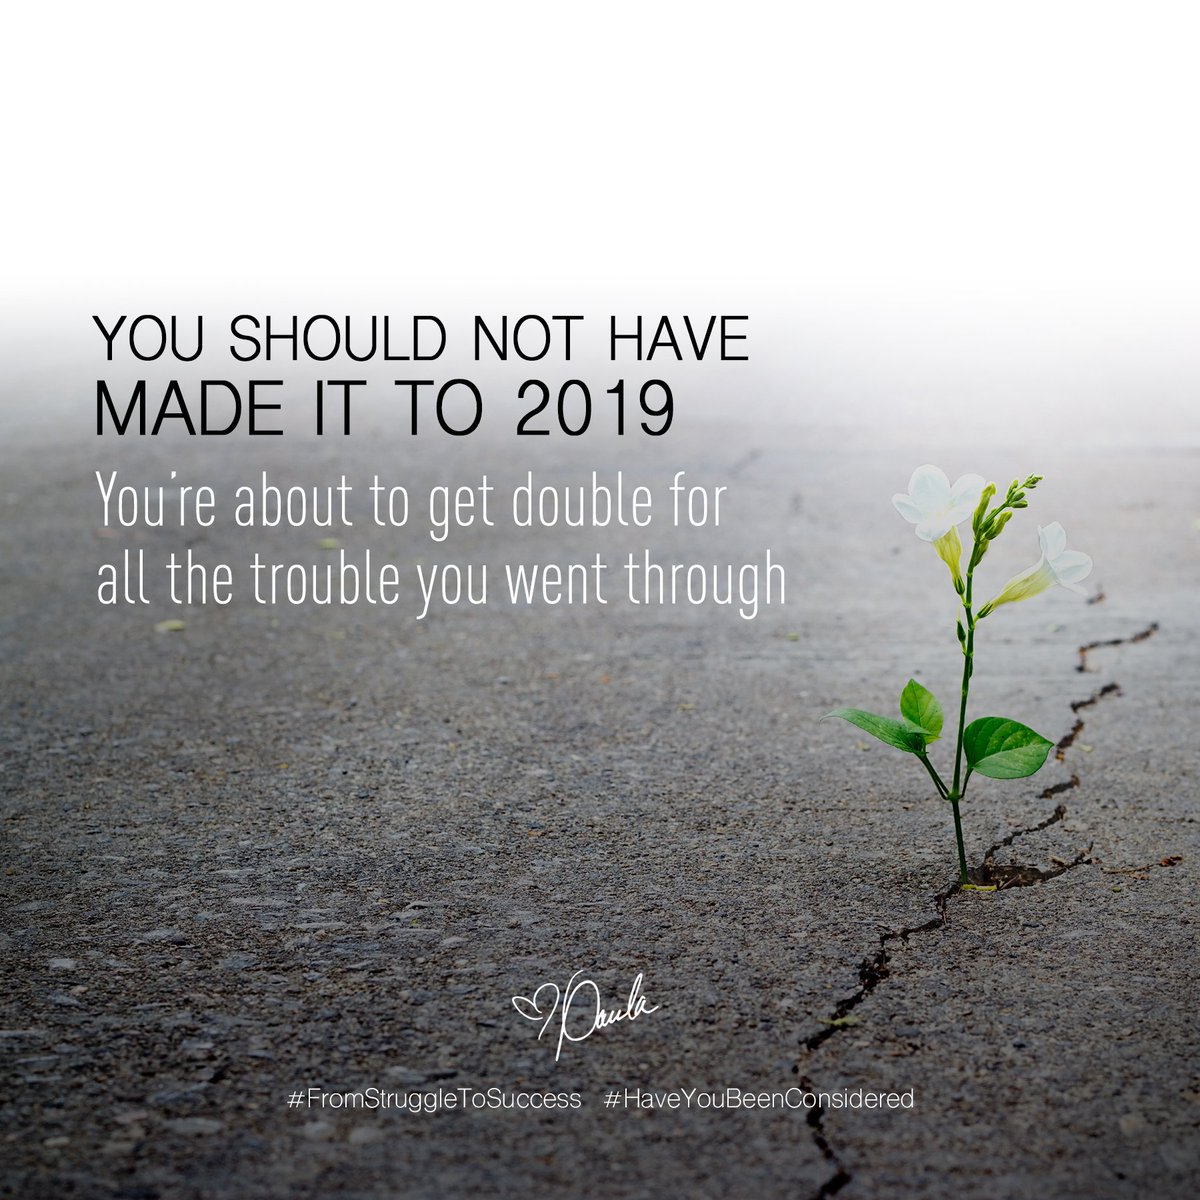 You're about to get double for all the trouble I went through 2019 will be a year of Divine Reversal, Restoration & Vindication. YOUR STRUGGLE WILL TURN TO SUCCESS!! YOUR LATTER IS GOING TO BE GREATER! 
#FromStruggleToSuccess #HaveYouBeenConsidered